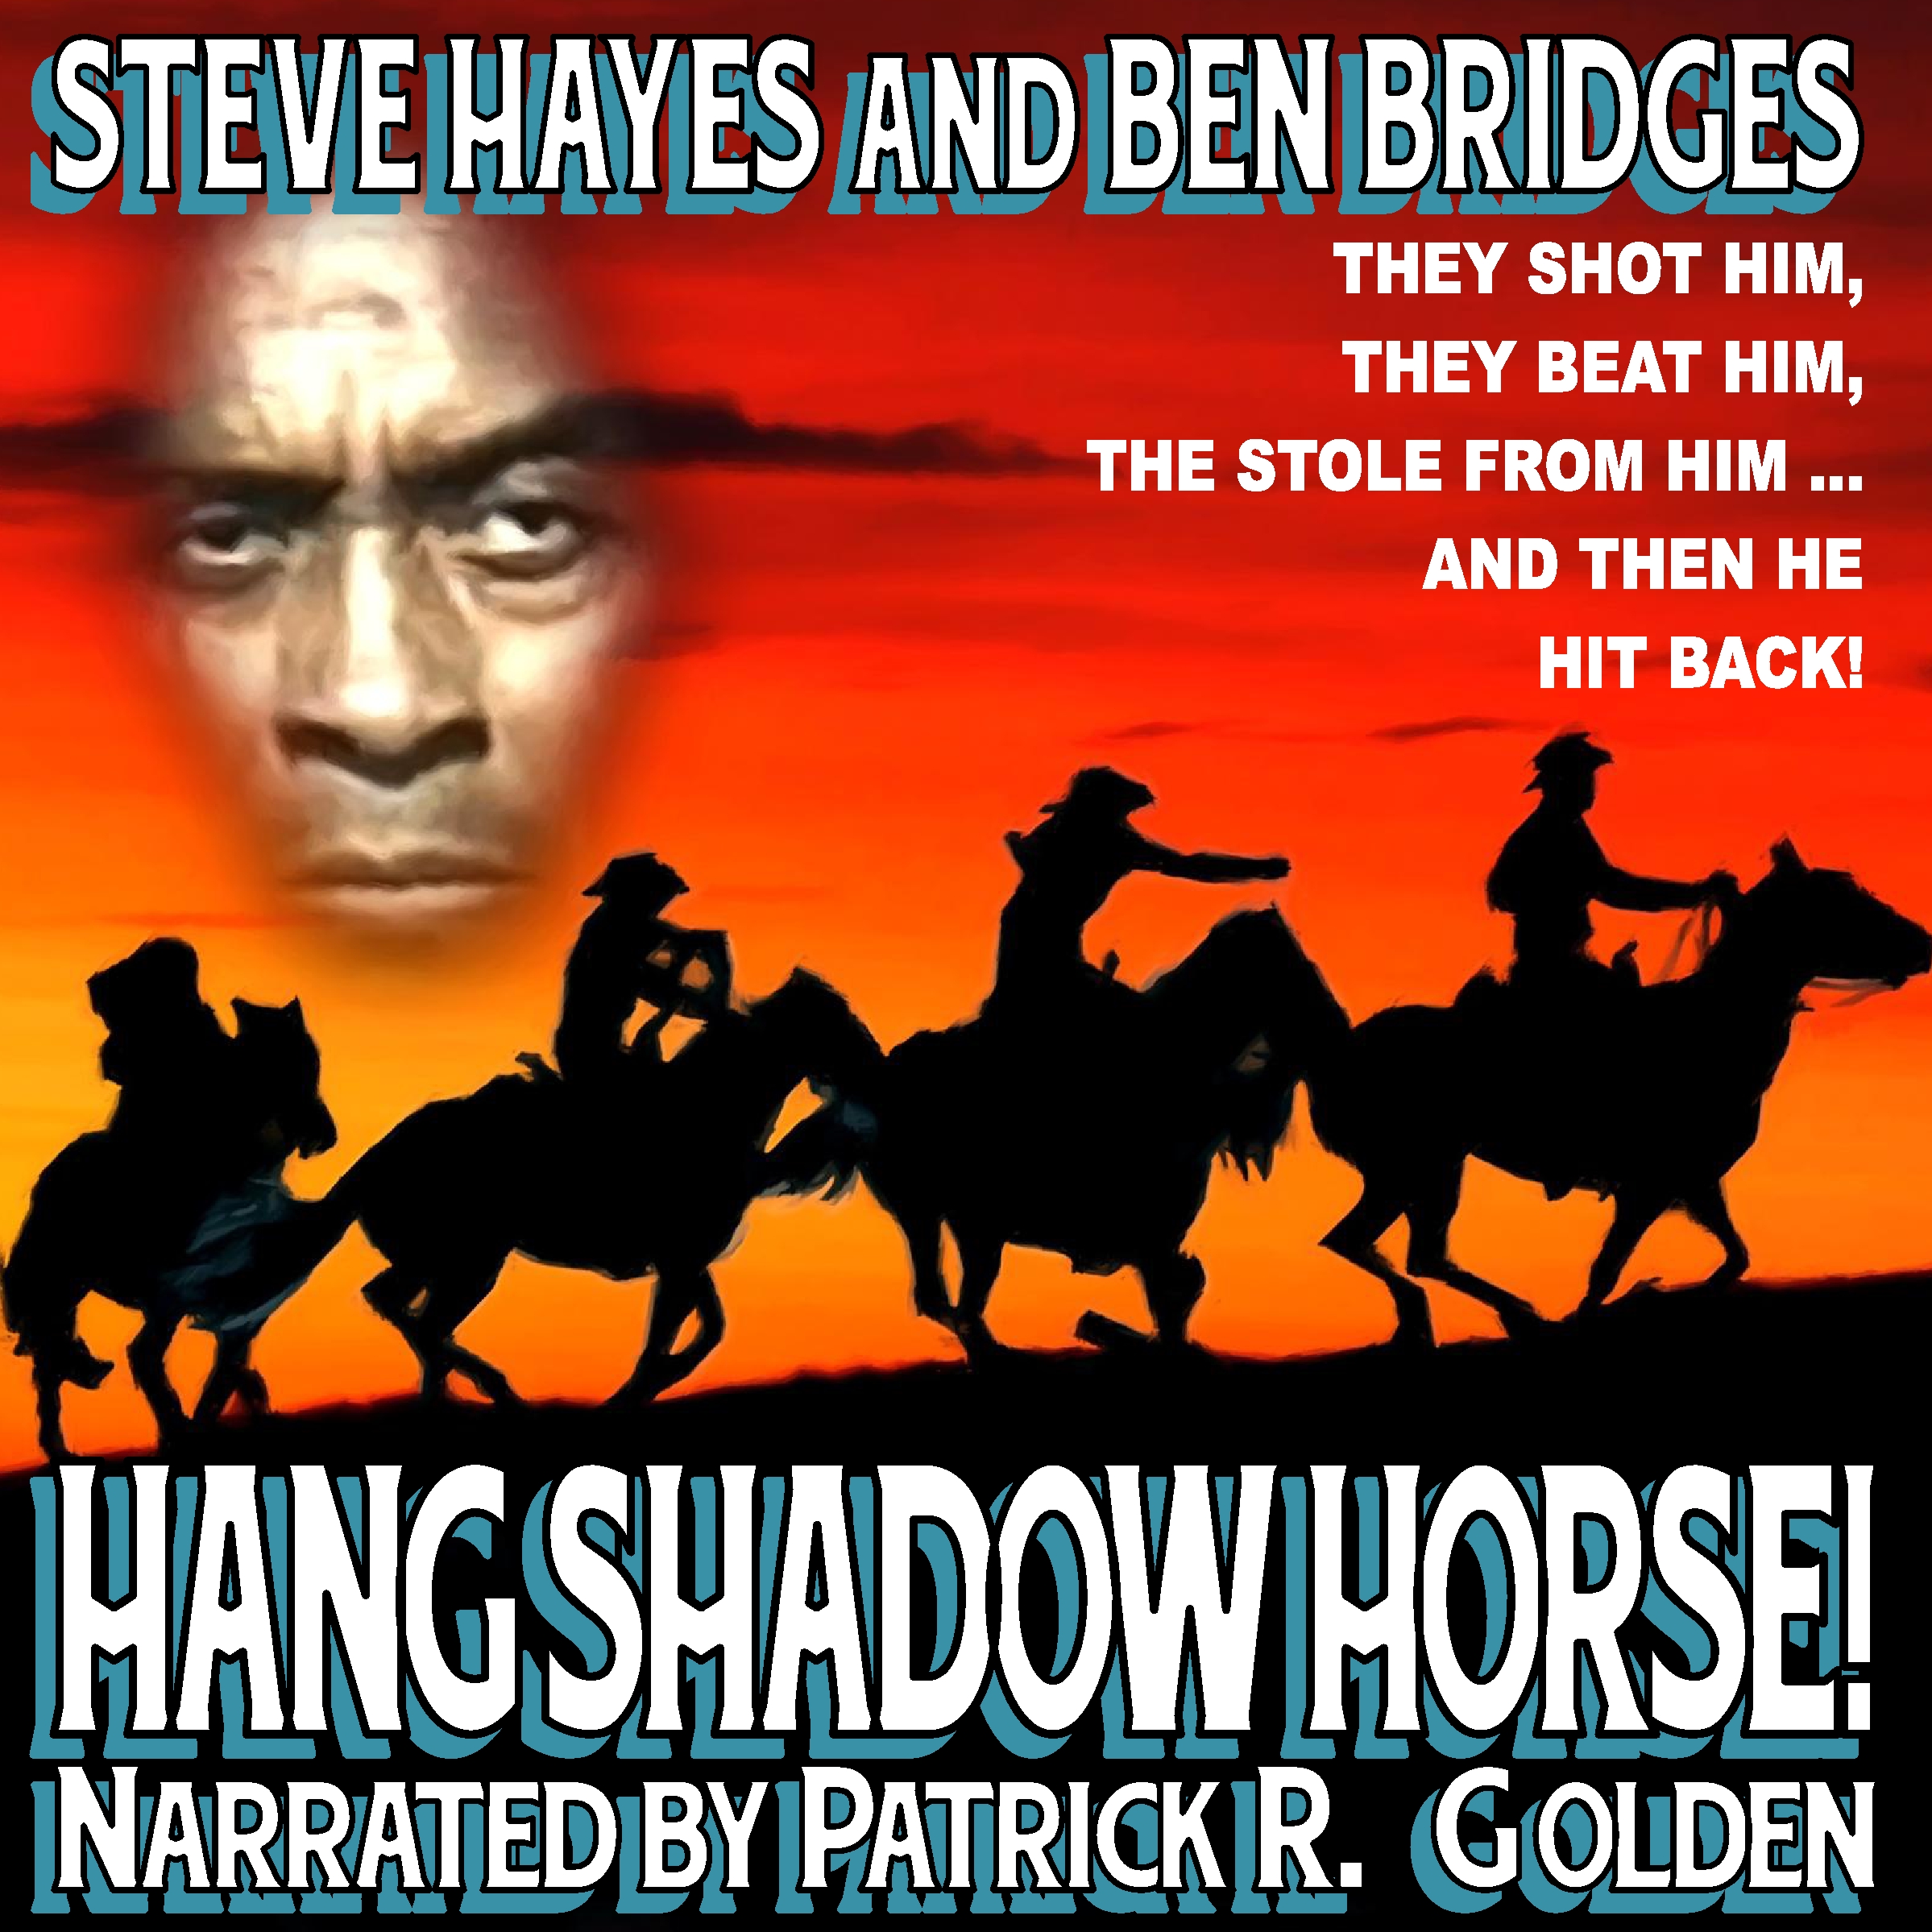 Hang Shadow Horse! Audio Edition by Steve Hayes and Ben Bridges